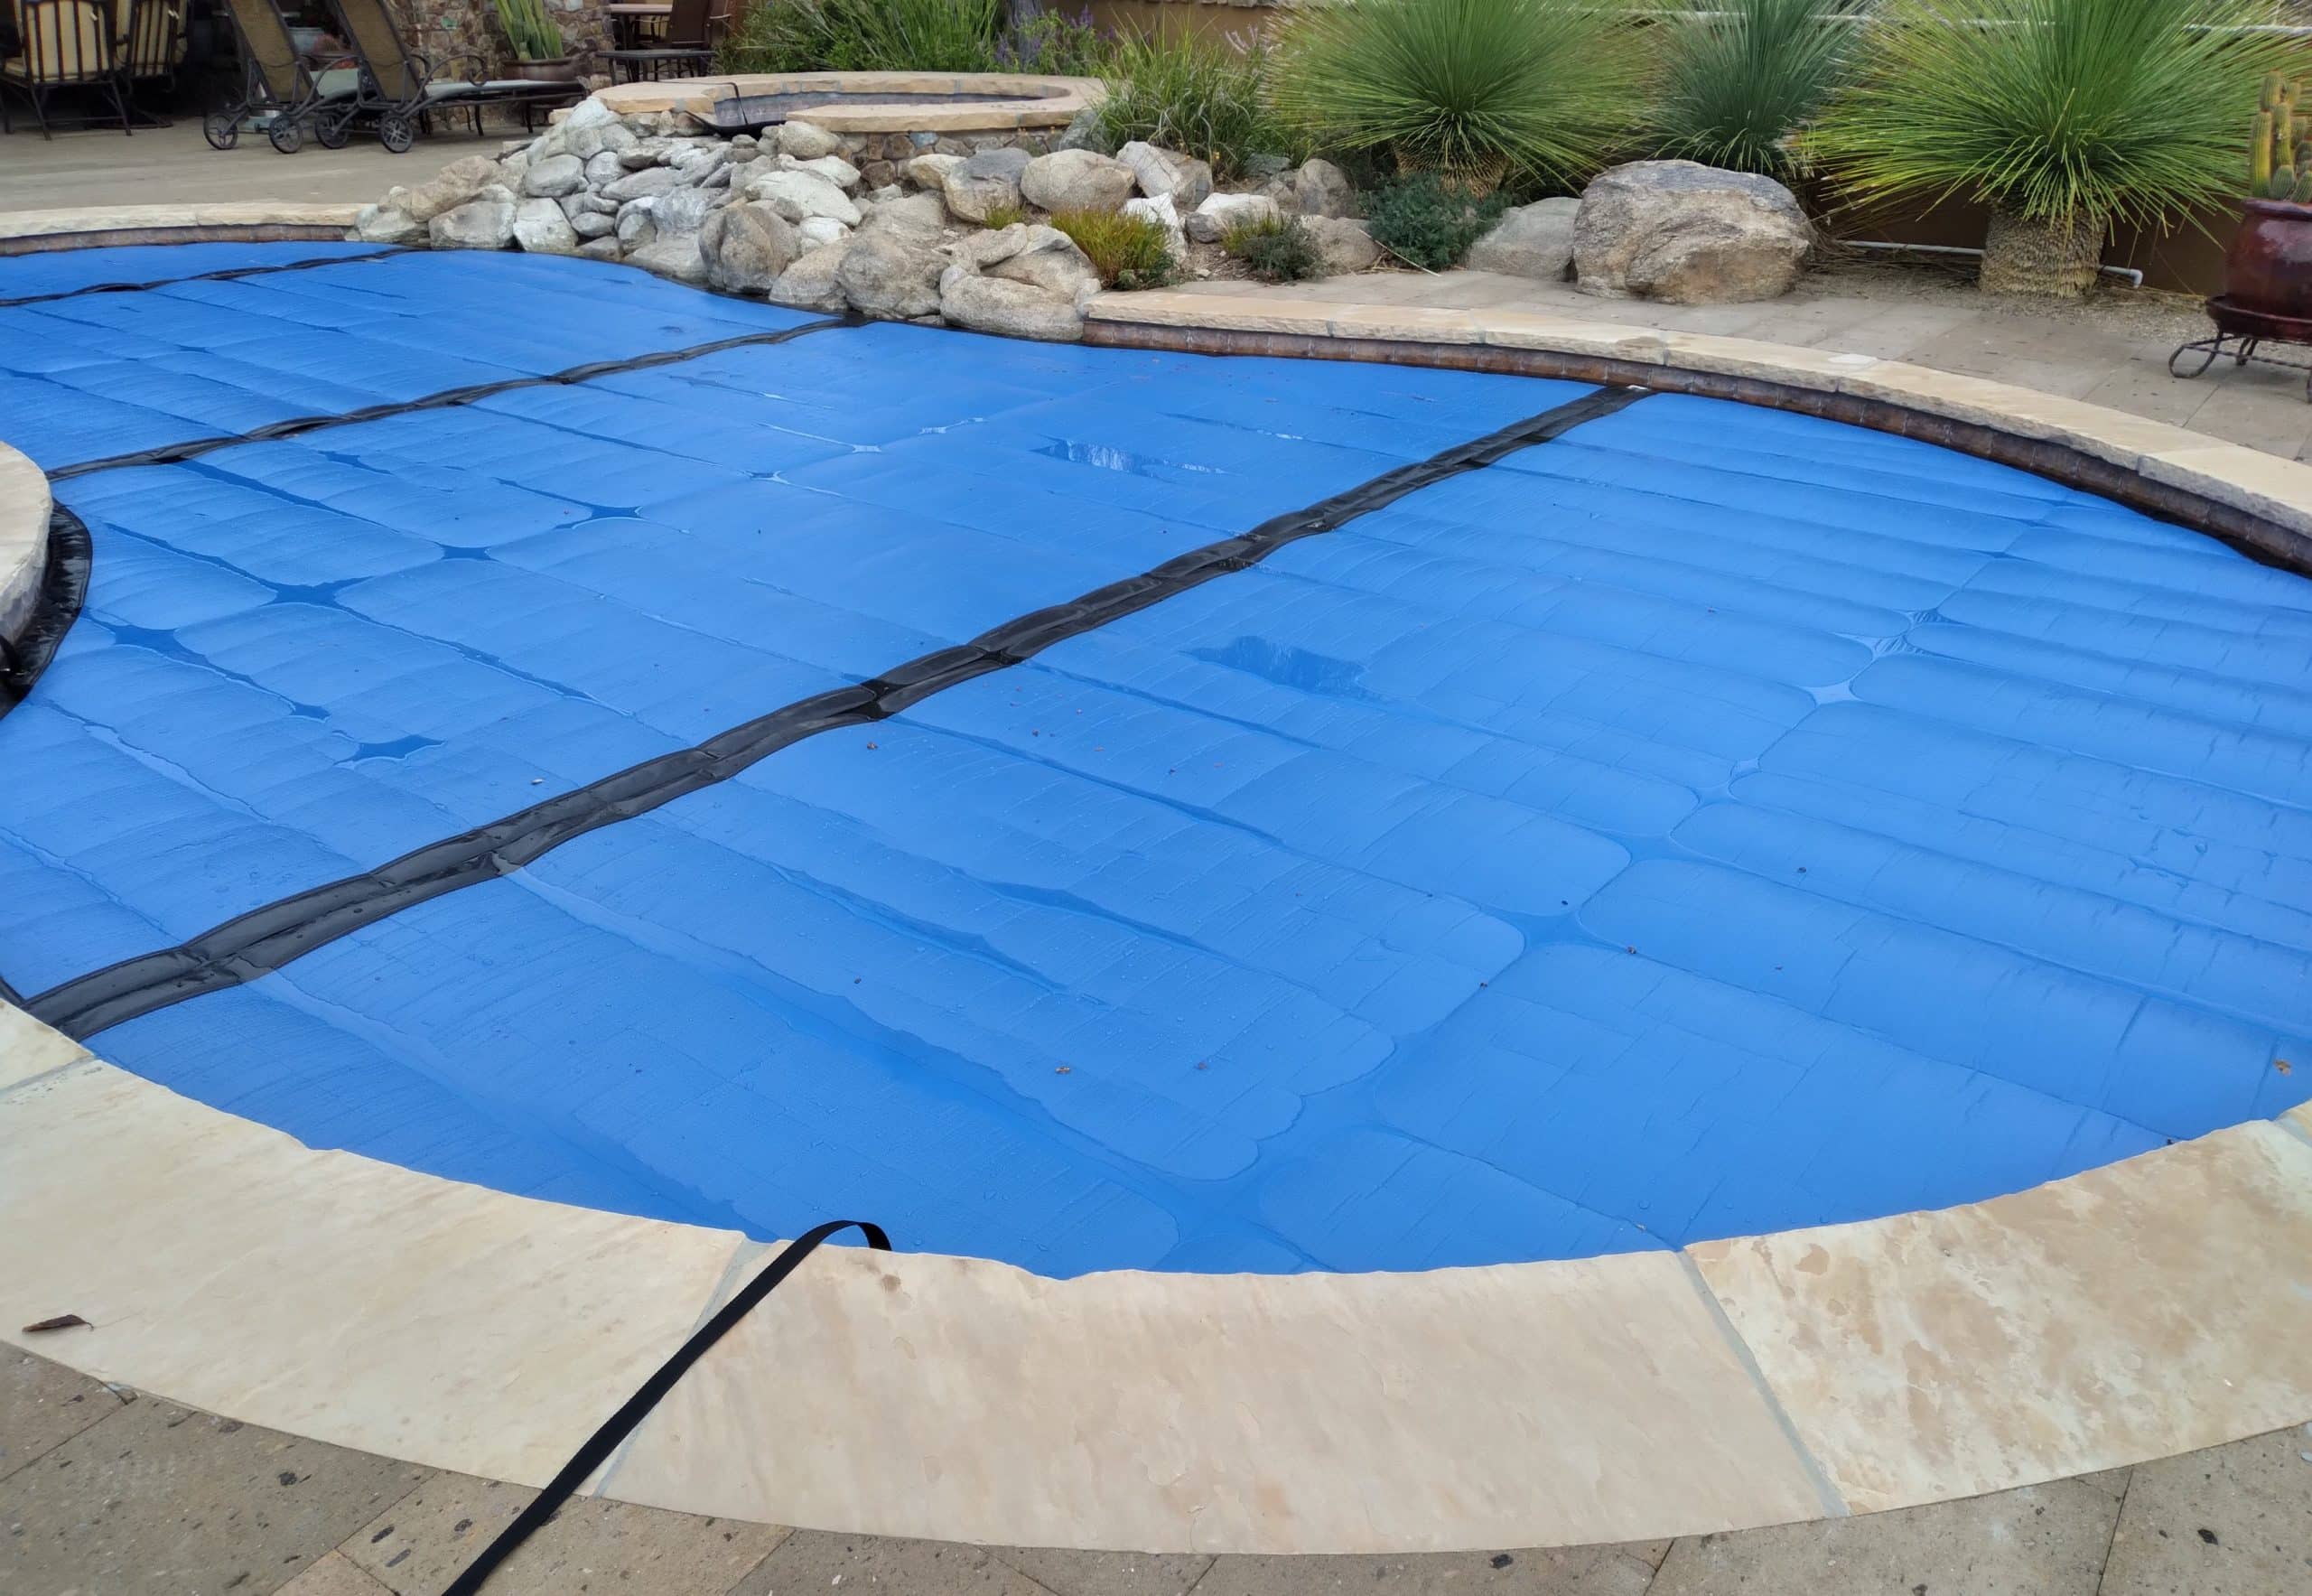 Curved Shape Thermal Pool Cover (Heatsaver)